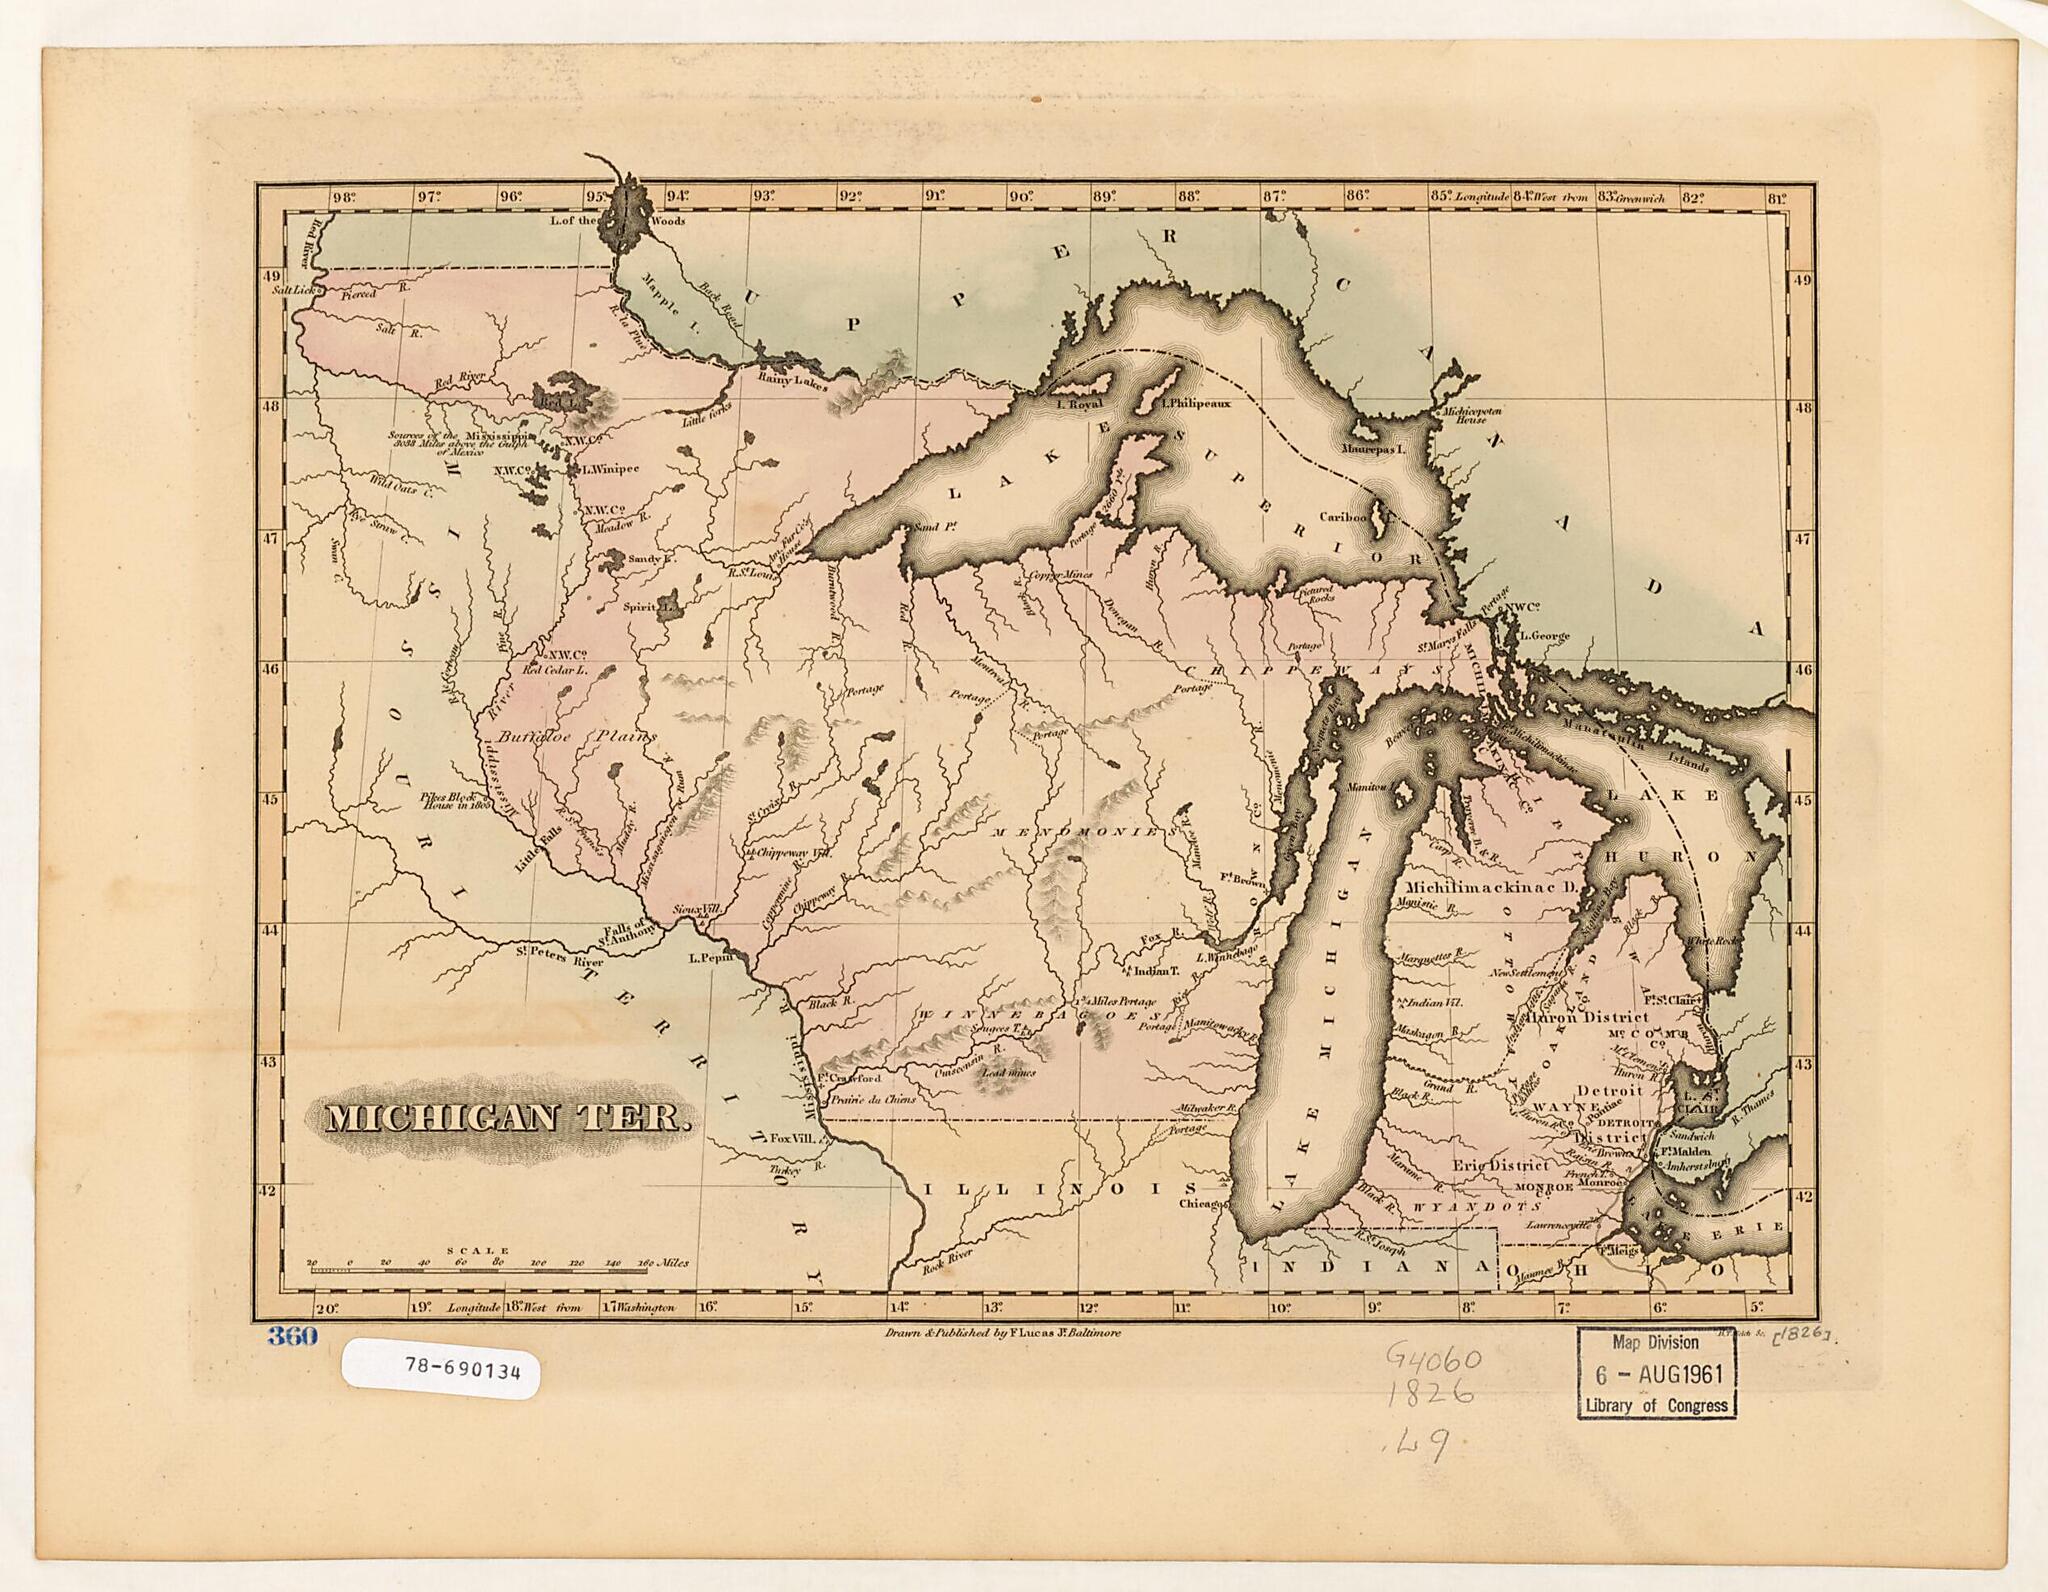 This old map of Michigan Ter from 1826 was created by Fielding Lucas, B. T. (Bartholomew Trow) Welch in 1826